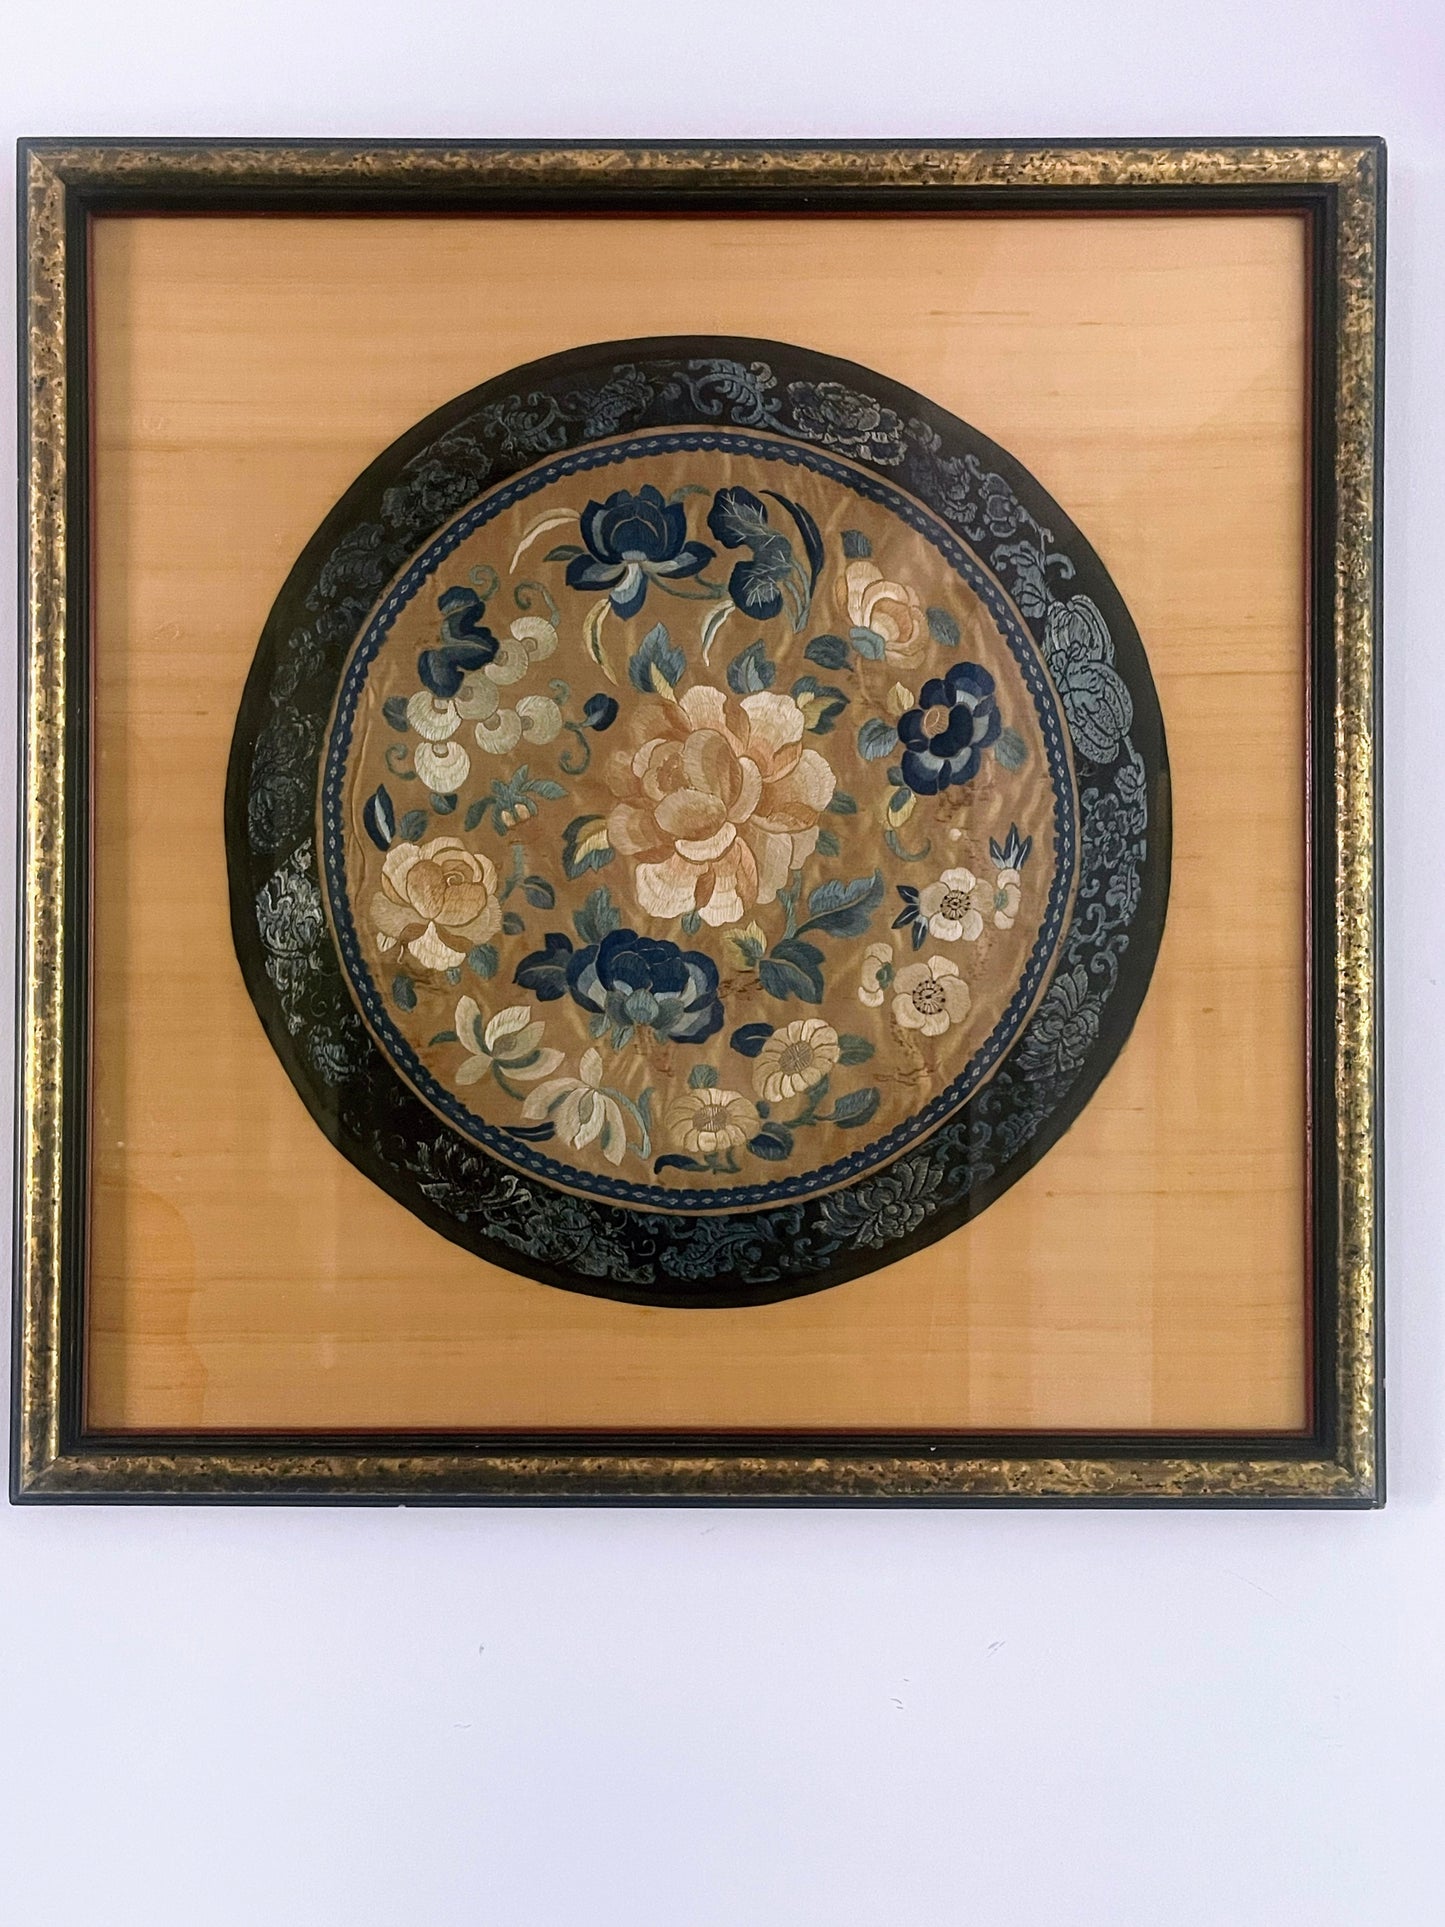 A framed embroidered 19th Century rank badge